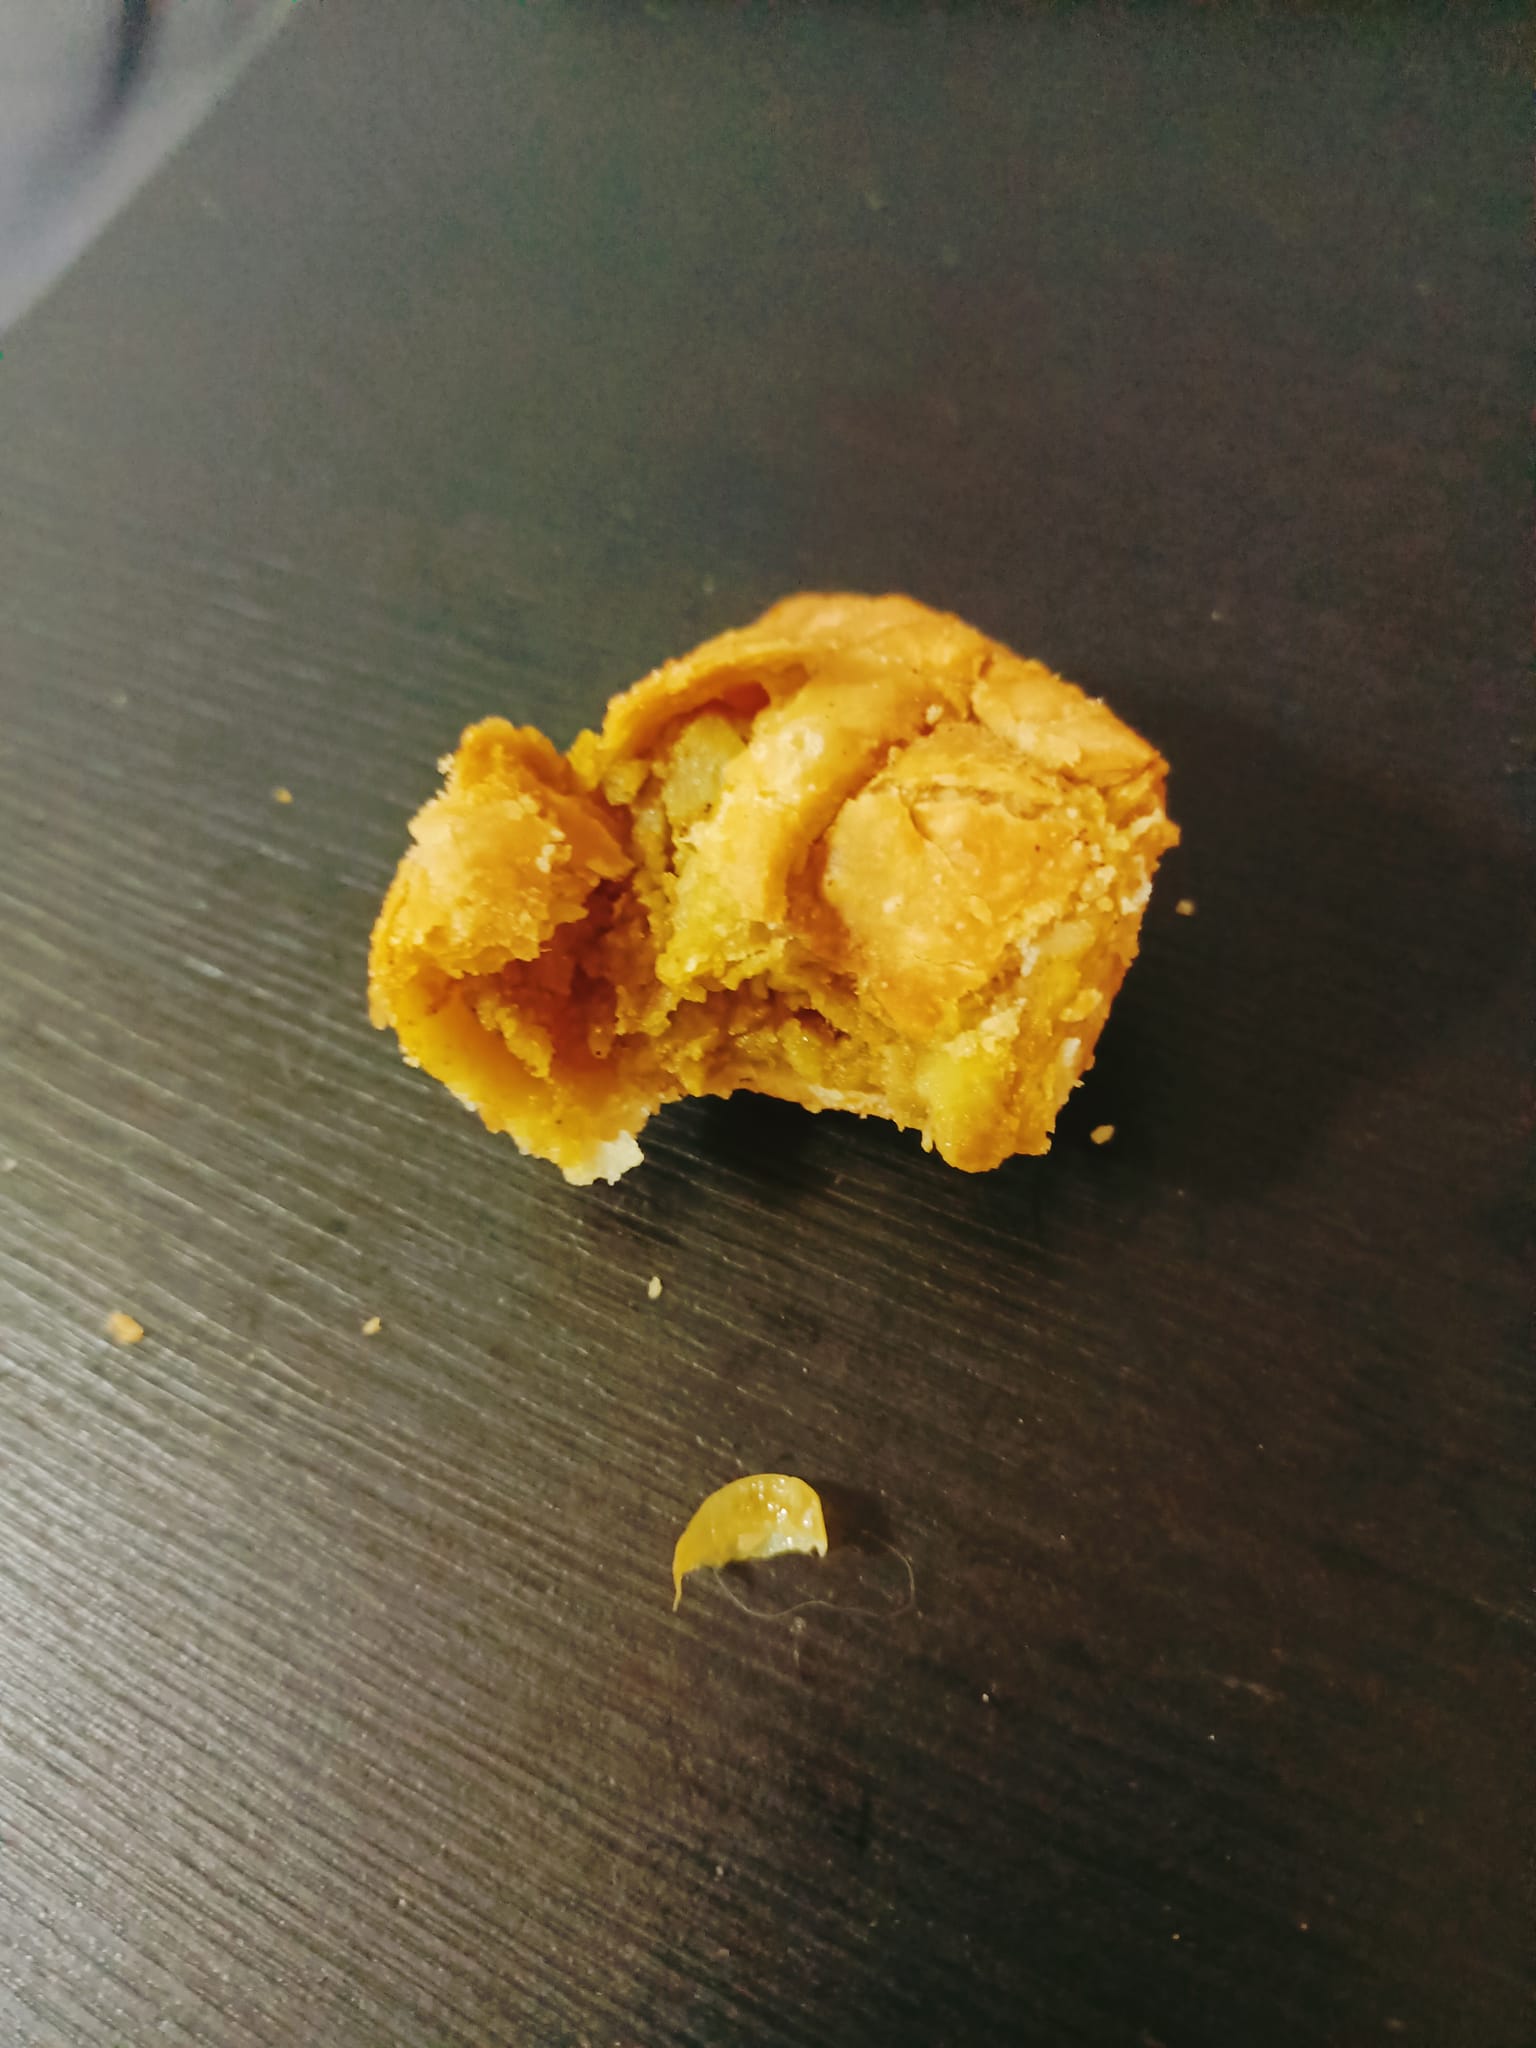 Extra ingredient found in woman's curry puff.